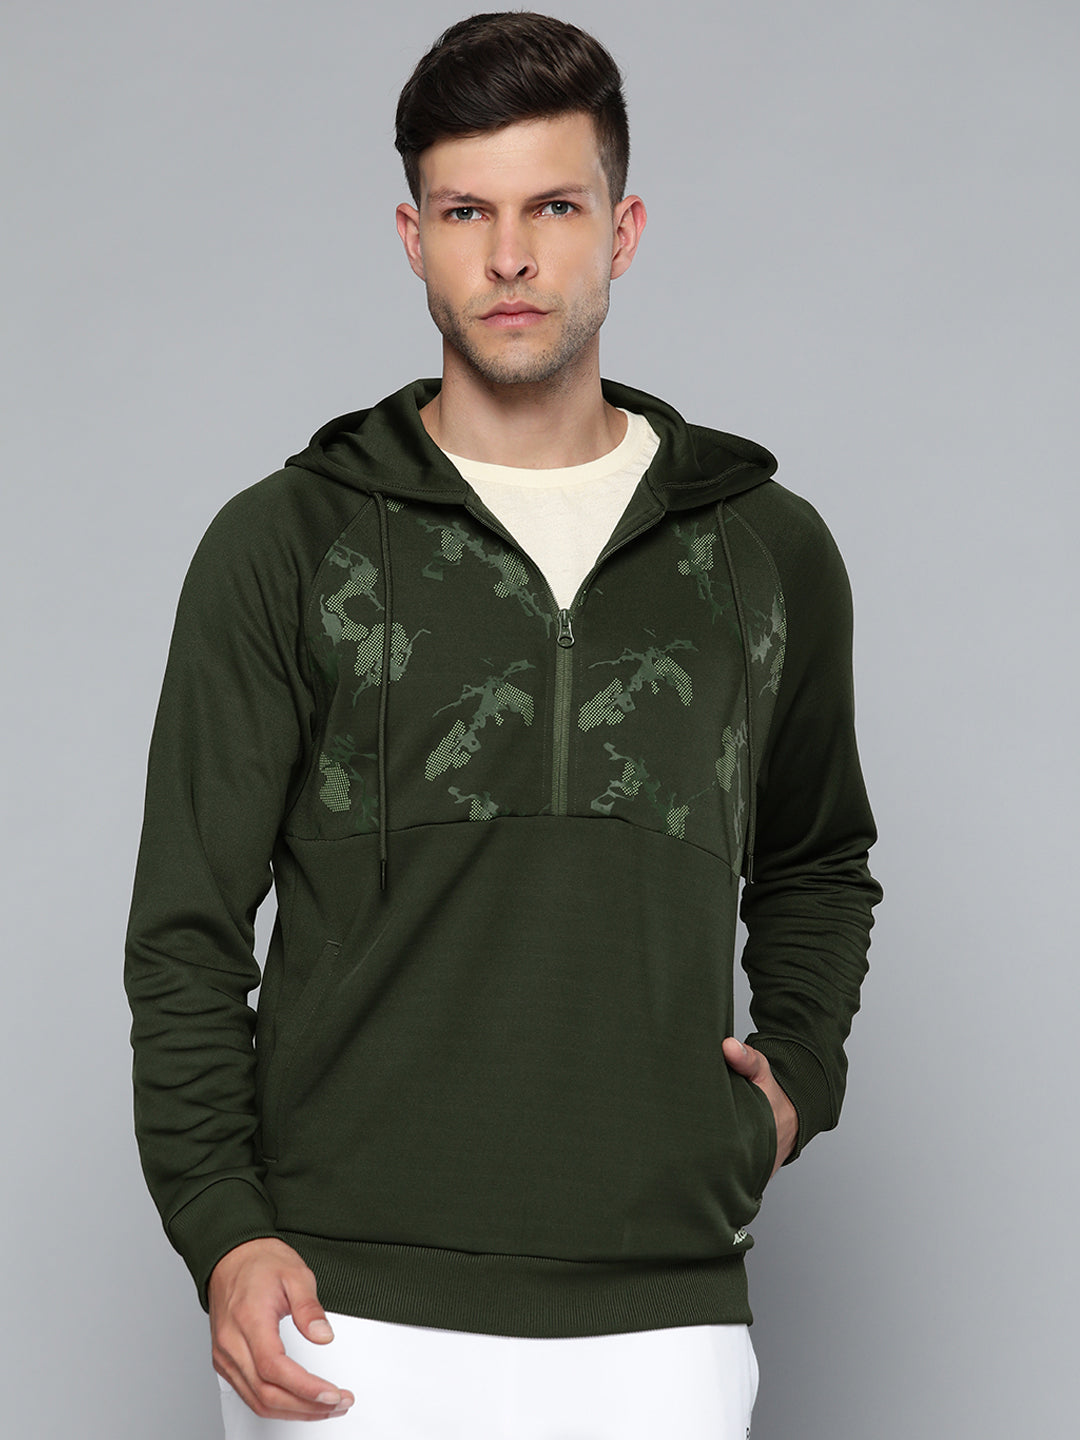 Alcis Men Olive Green Abstract Printed Hooded Sweatshirt